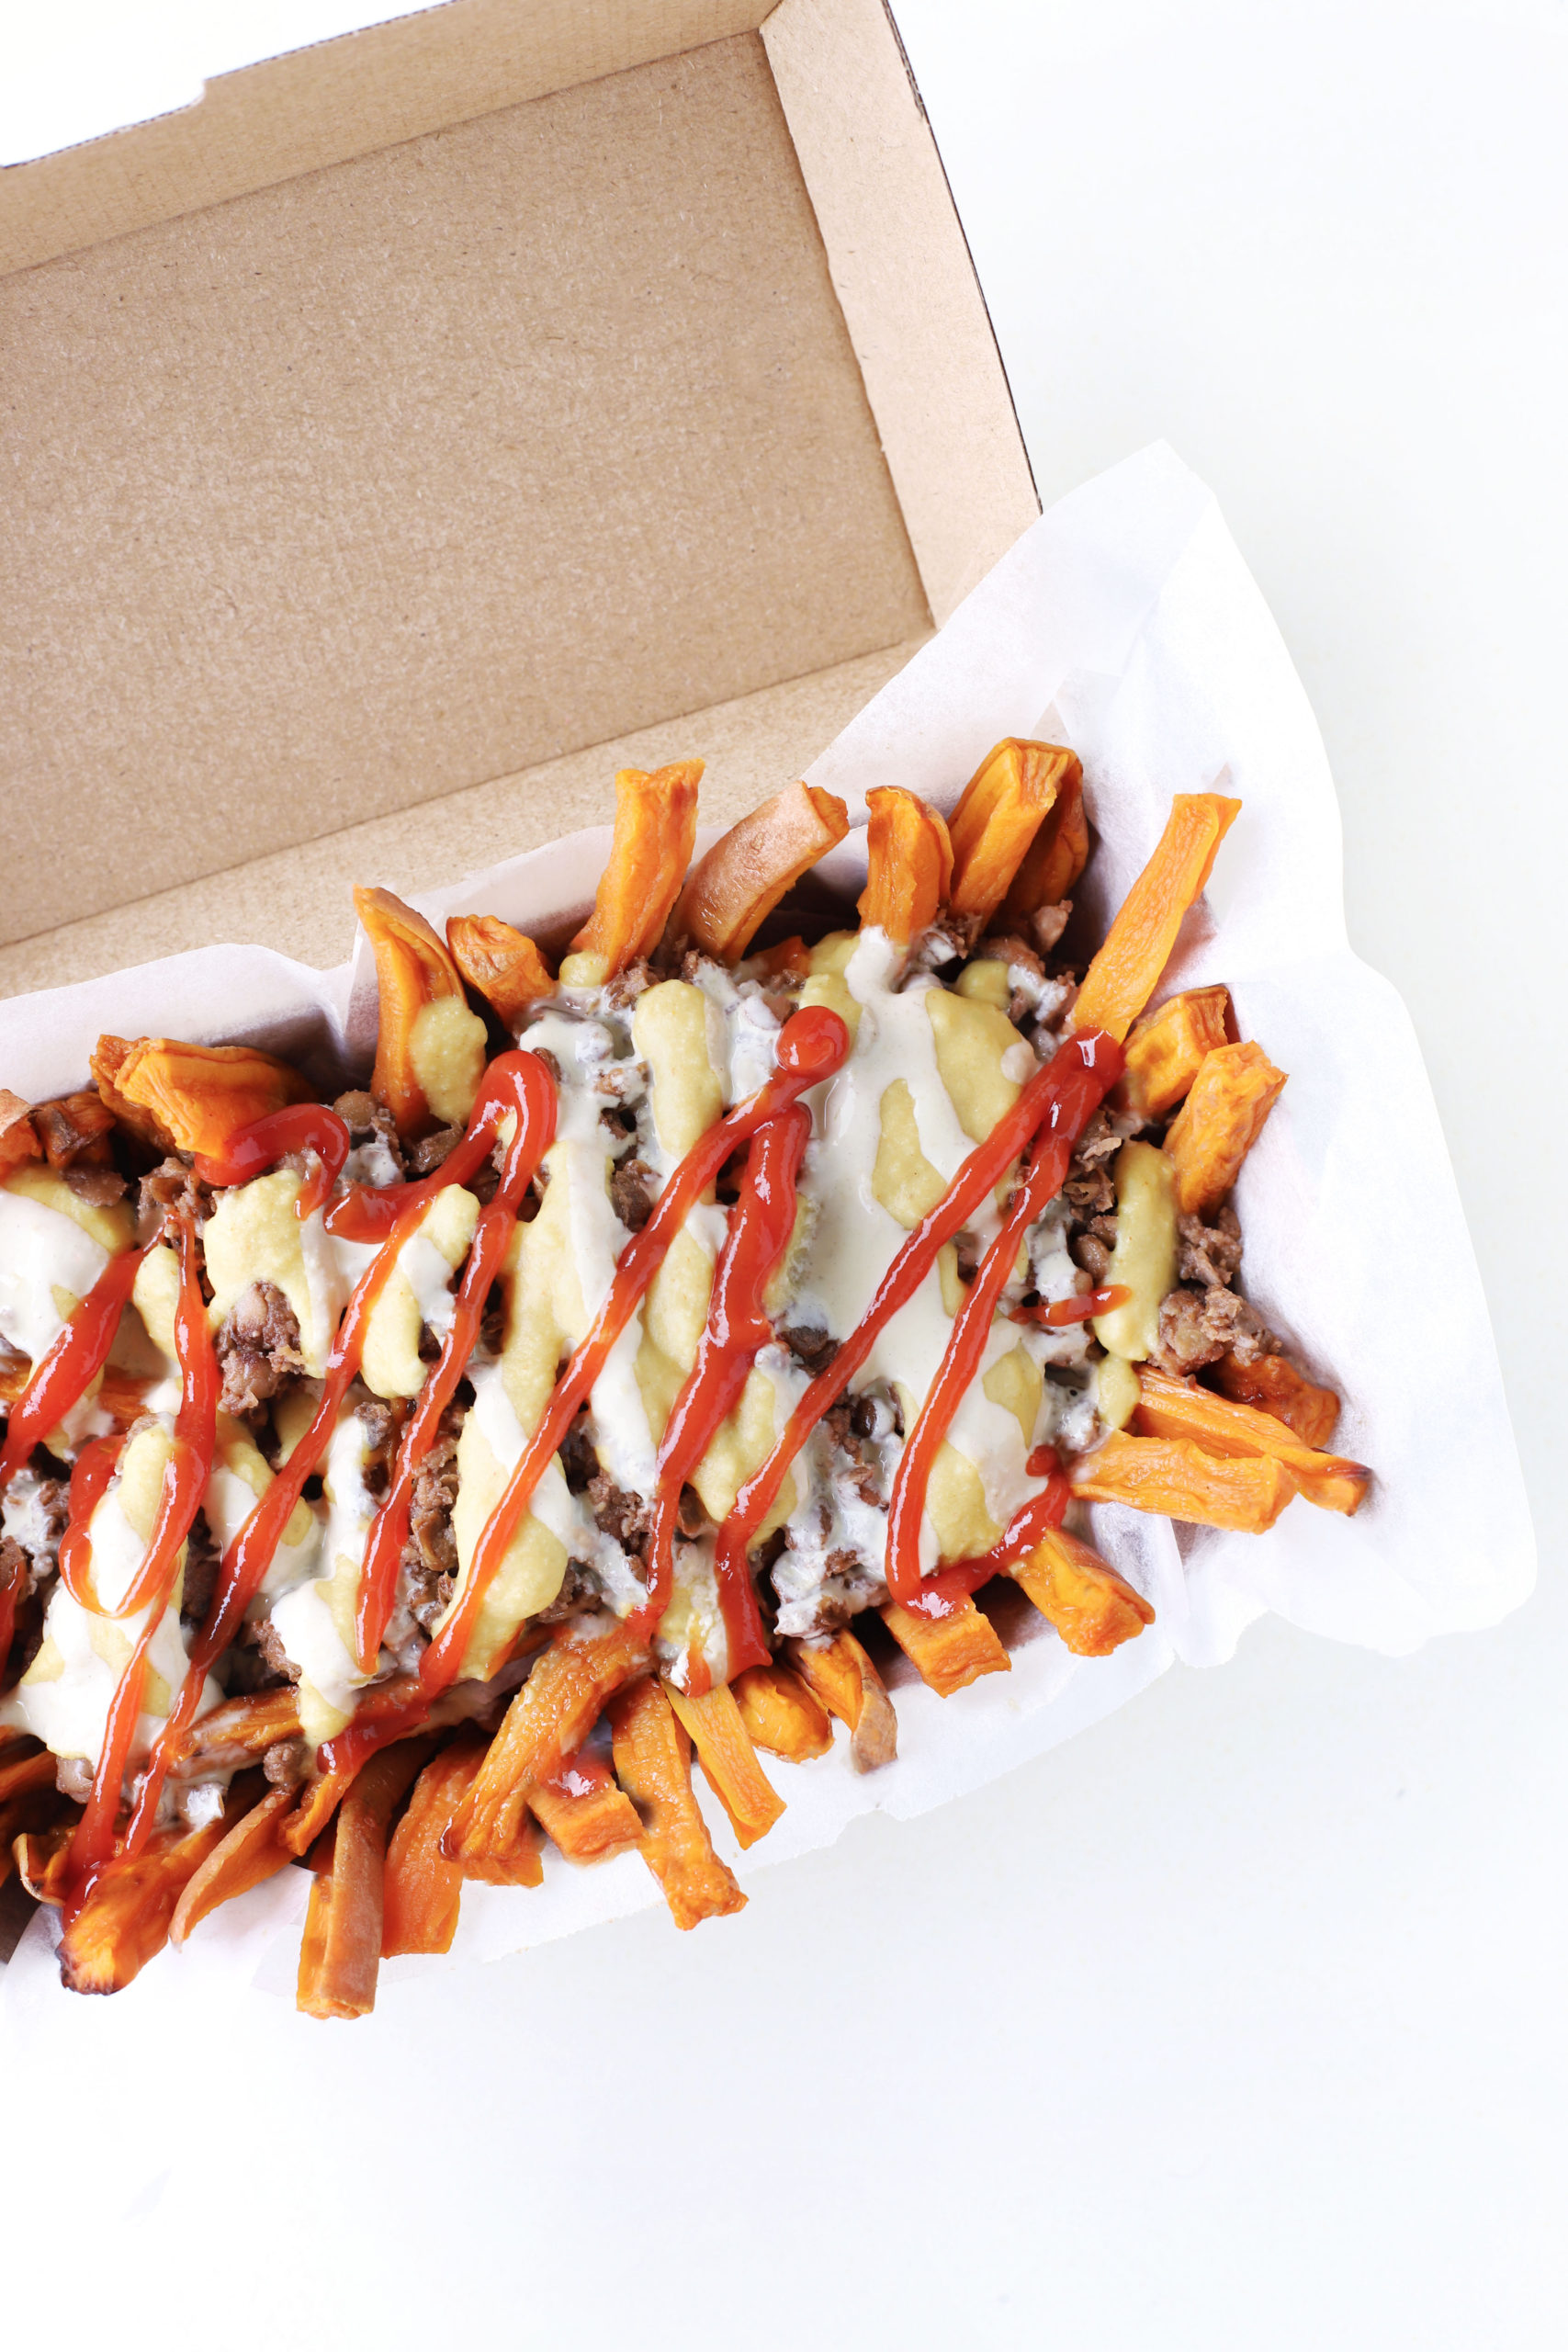 Healthy Vegan sweet potato fries poutine with creamy hummus sauce, ketchup (tomato sauce) plantbased 'mince' meat and dairy free cheesy sauce.